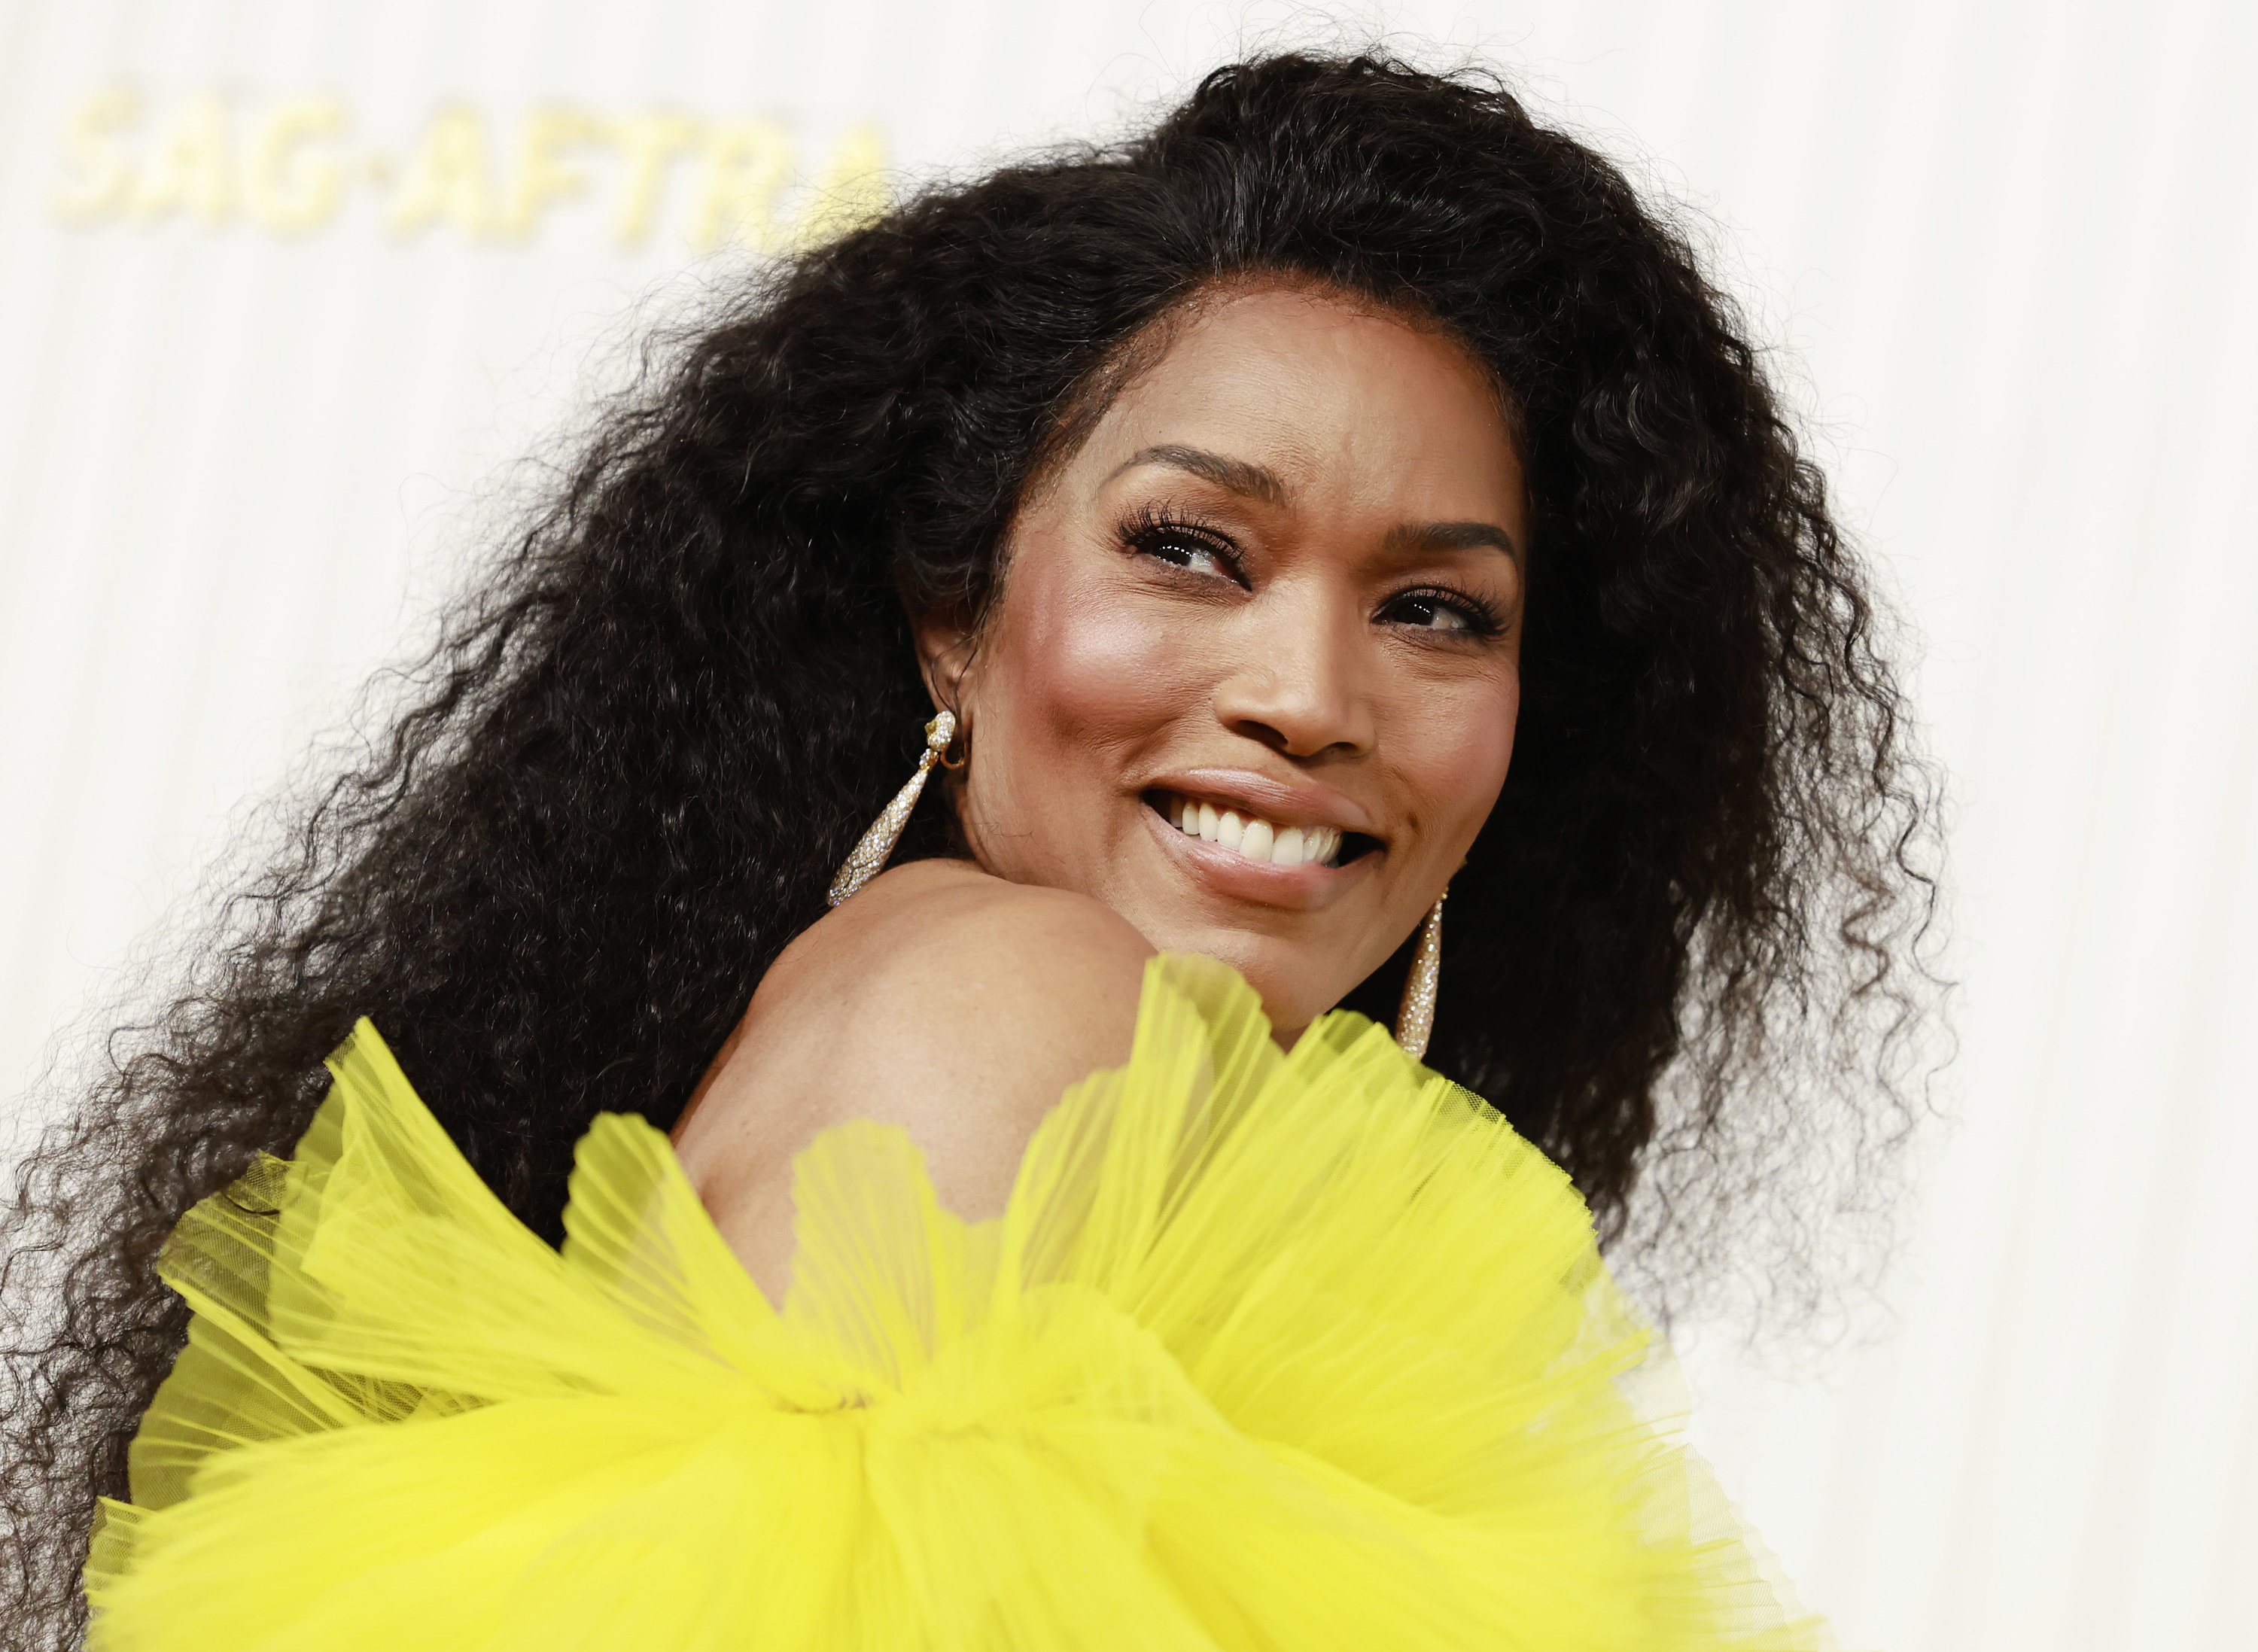 Angela Bassett smiling and posing on a red carpet